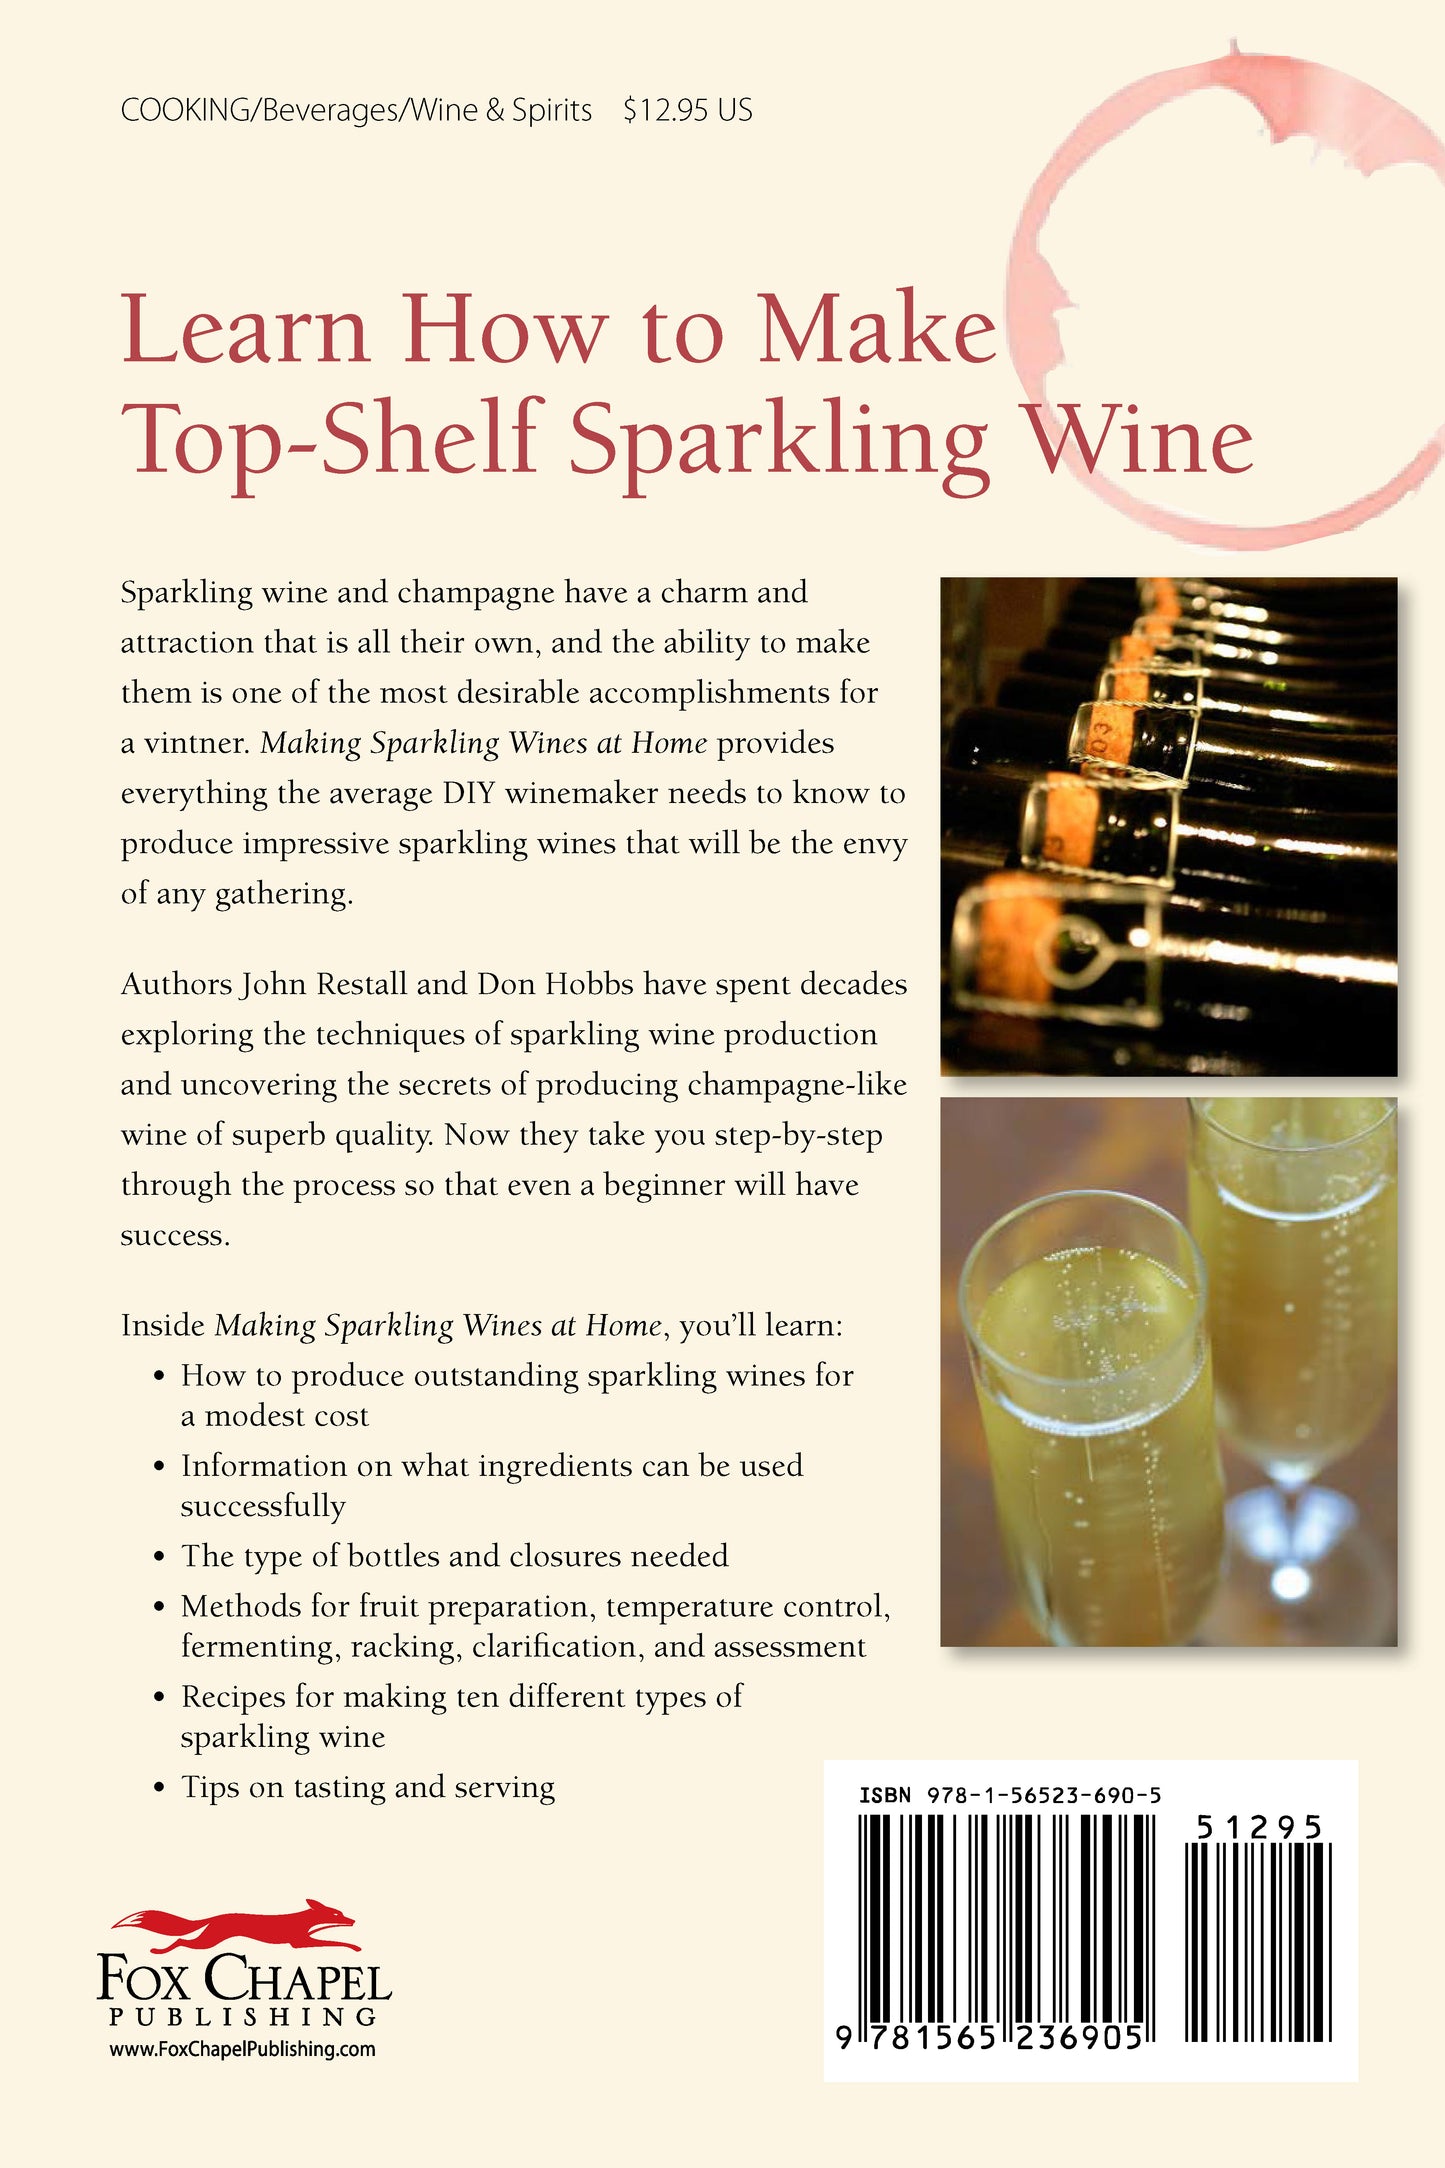 Making Sparkling Wines at Home